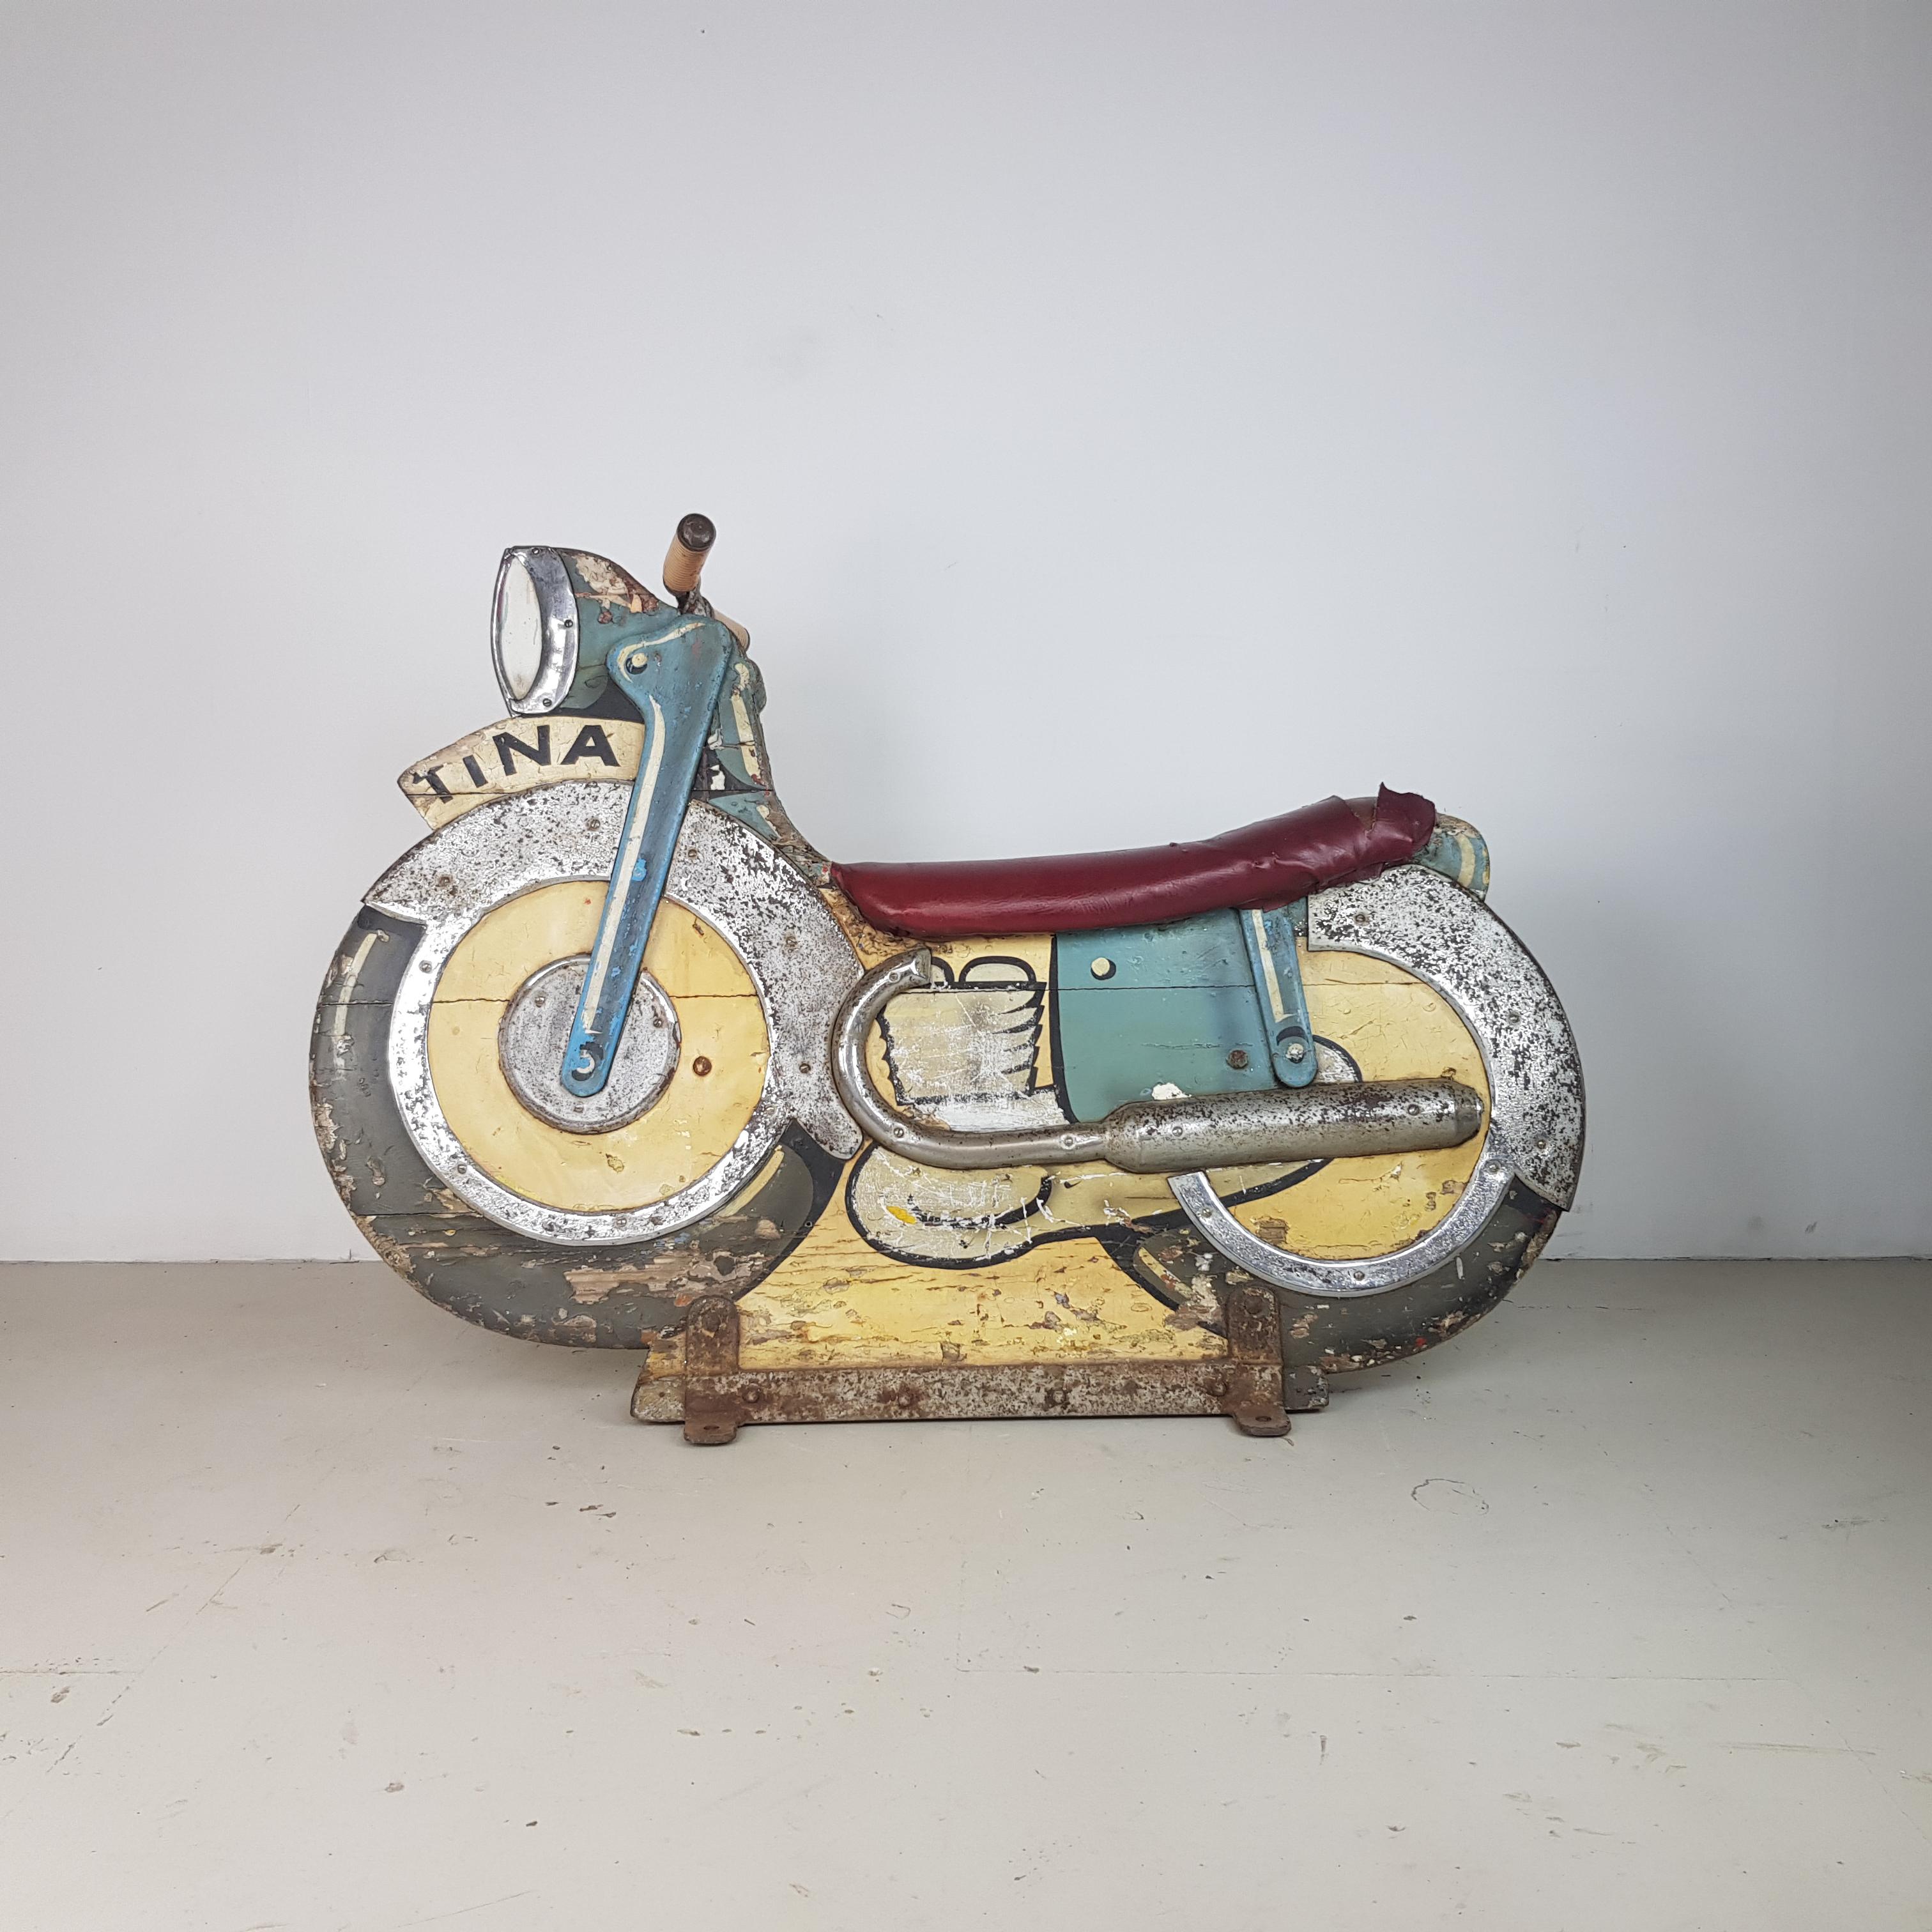 Rare and collectable 1940s fairground ride motorbike.

On a slight angle, would have been the outside ride on the carousel. 

Stands on its own or can be bolted to the floor.

Approximate dimensions:

Height 91cm

Width 130cm

Depth